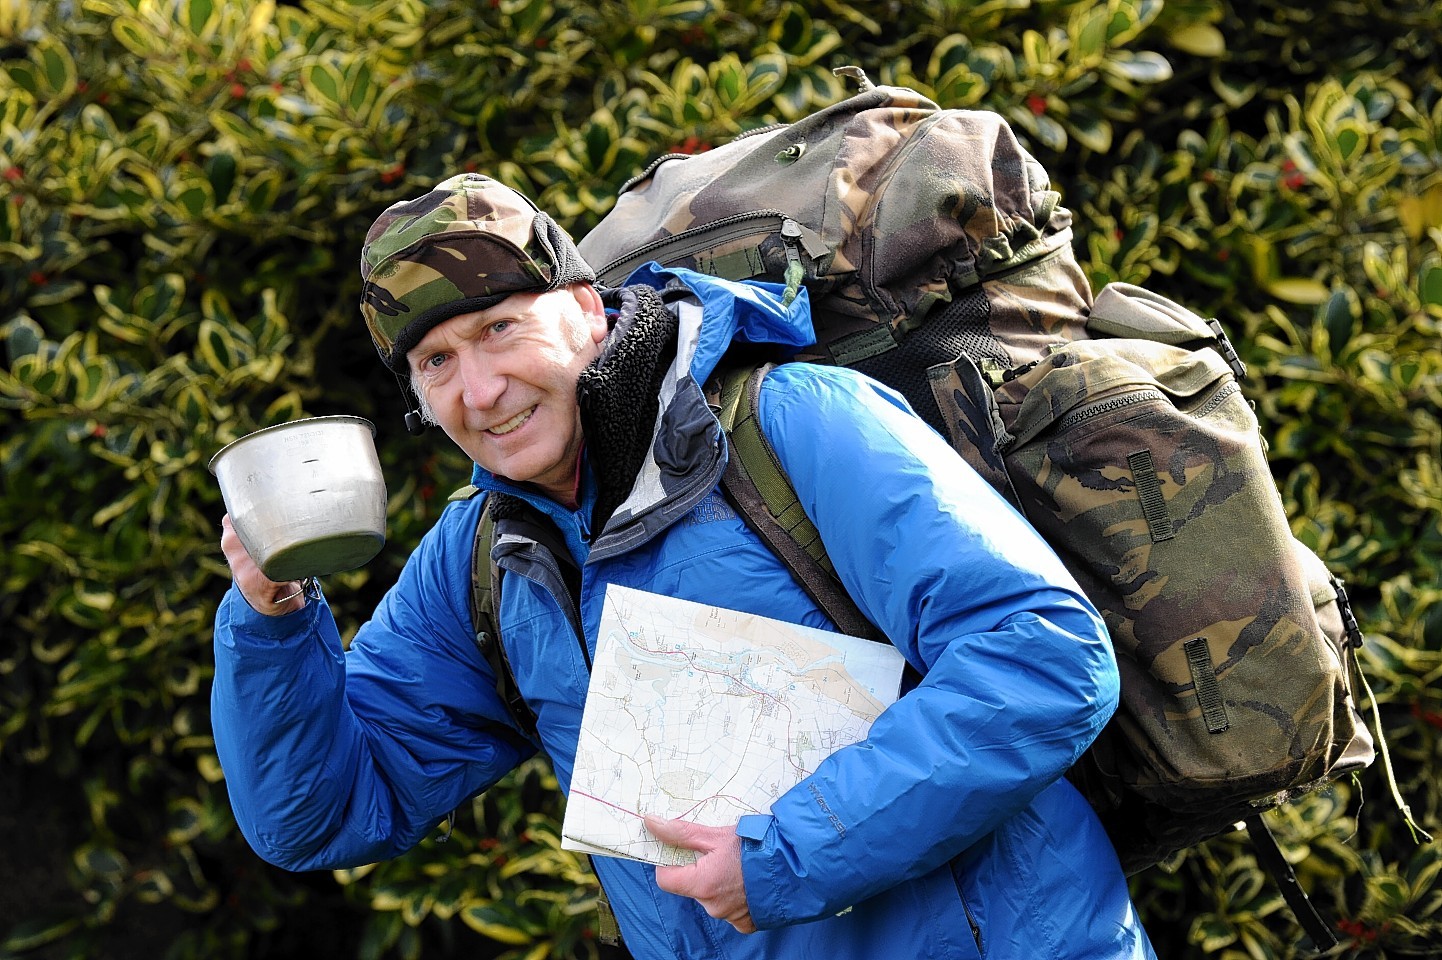 Lionel Holmes is all set to camp out at the Forvie National Nature Reserve for 72 hours